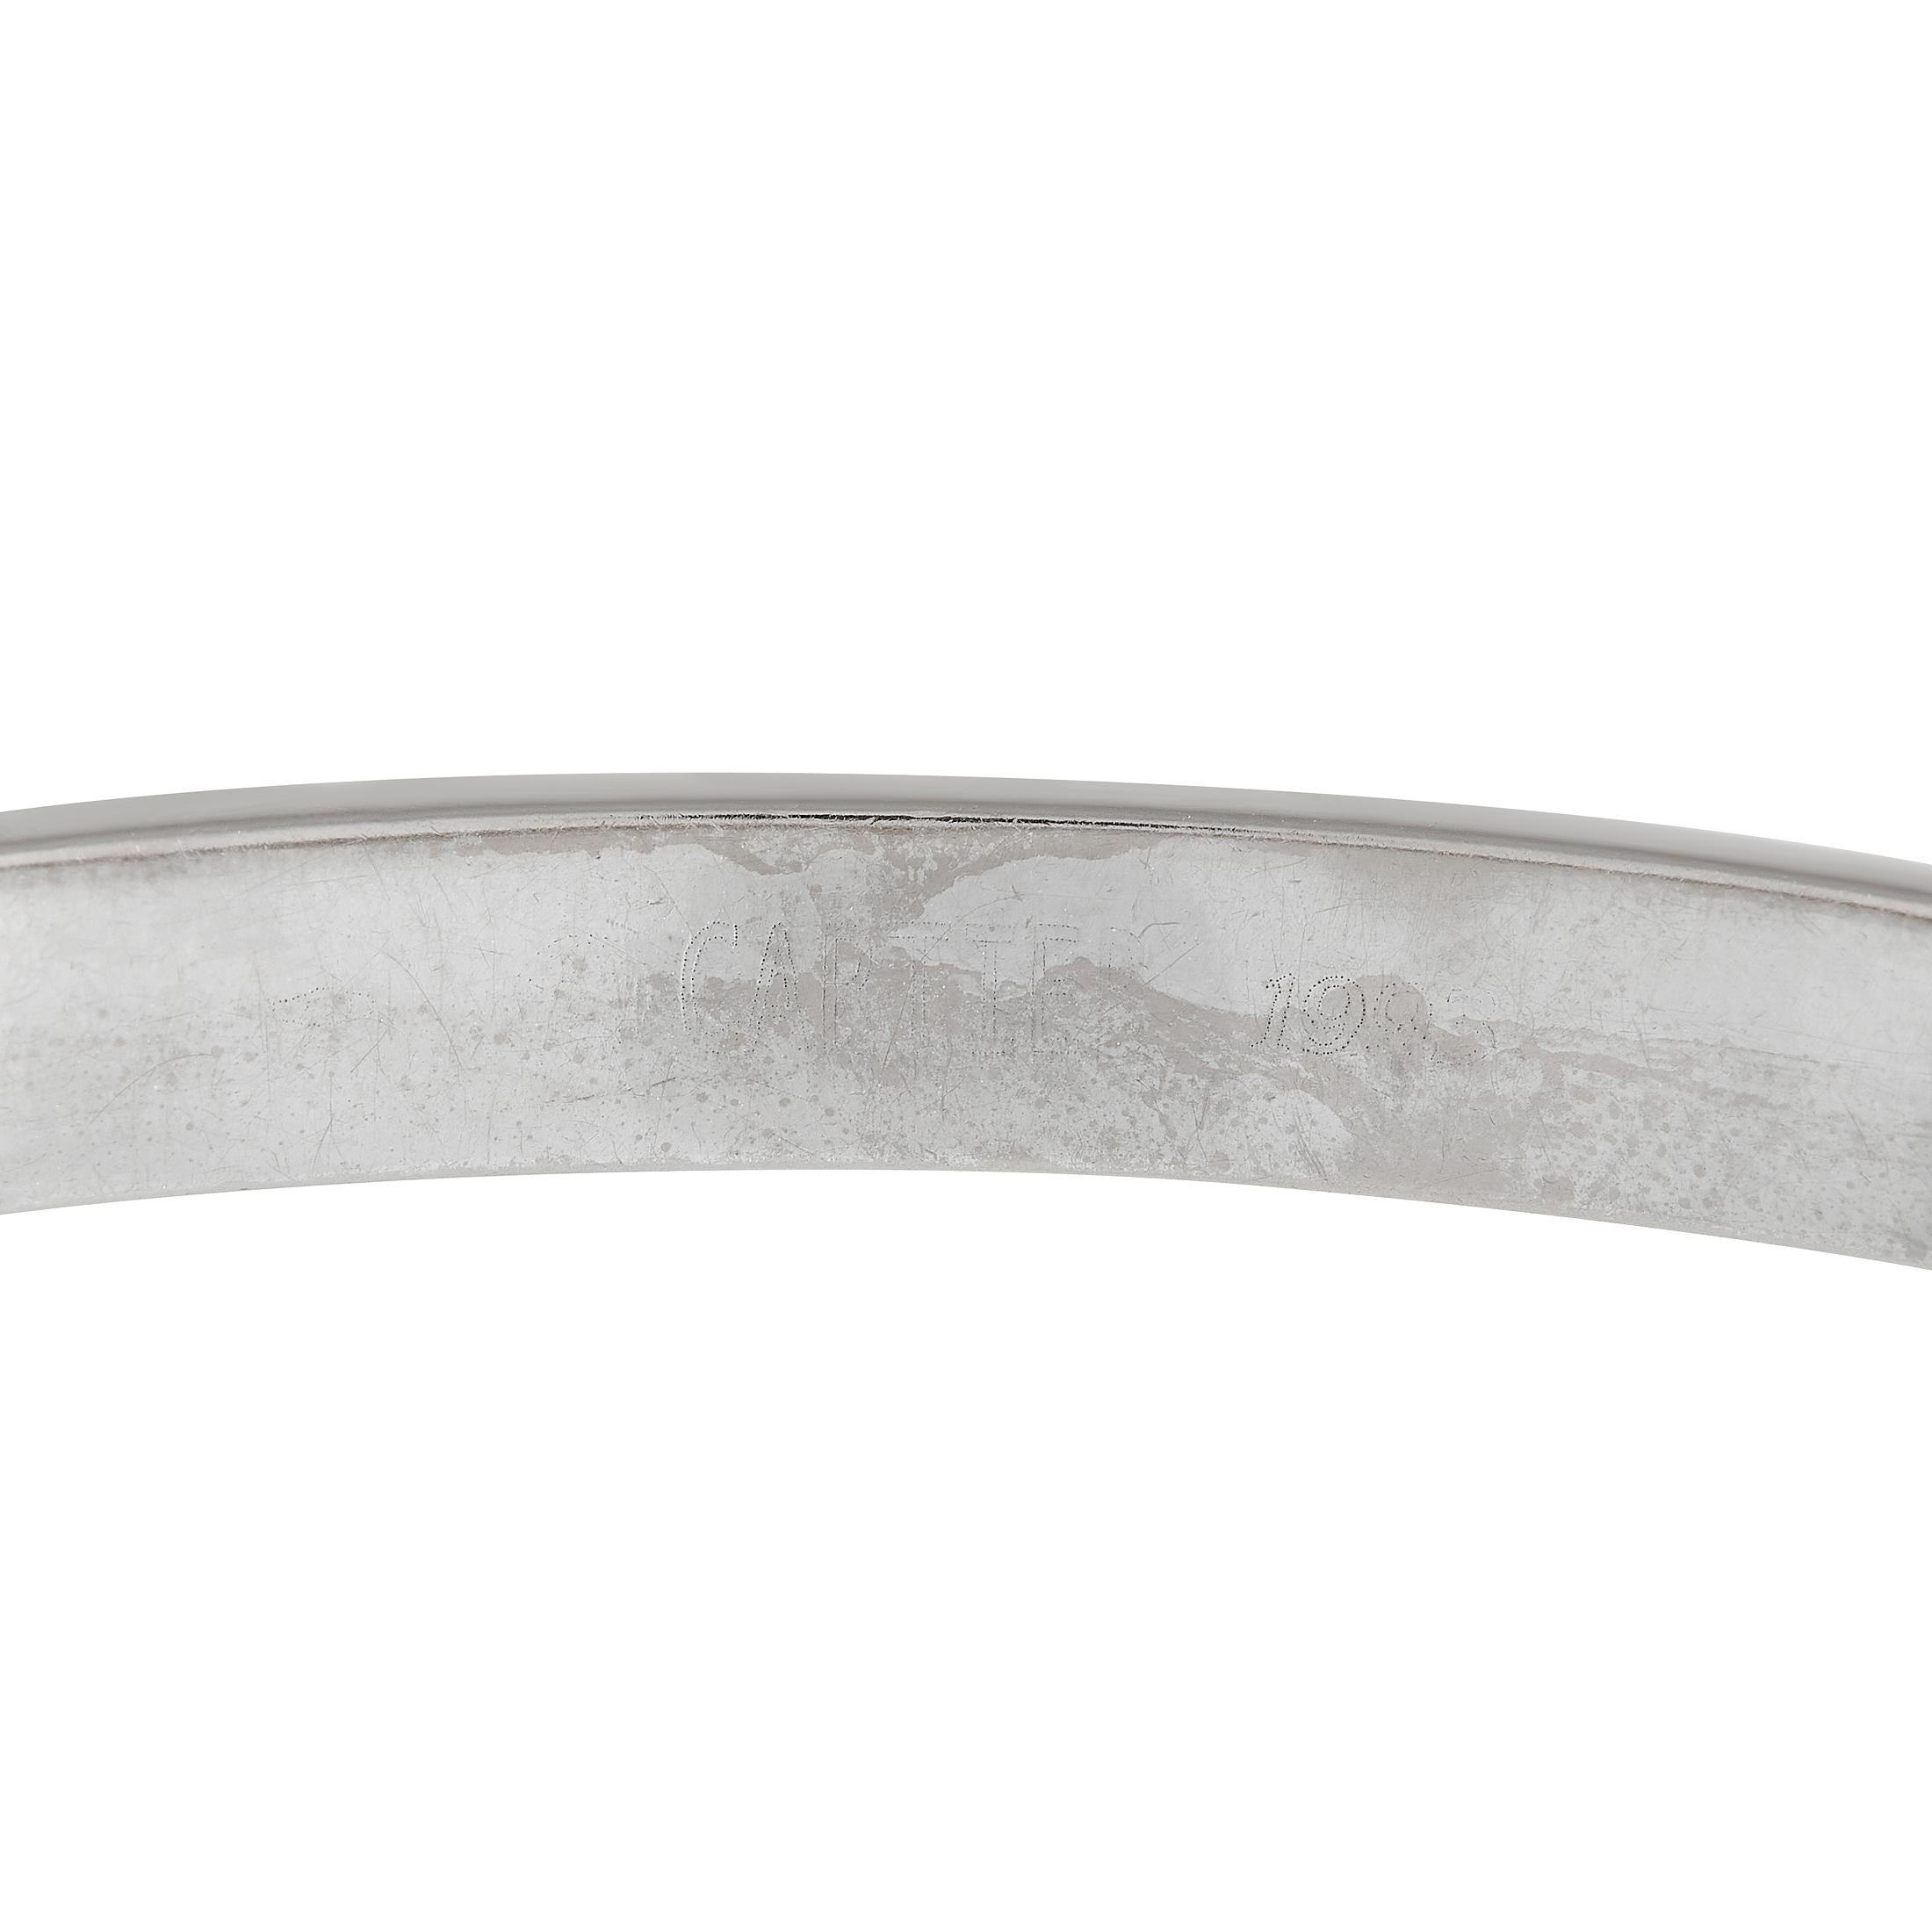 This iconic Cartier LOVE bracelet is a timeless luxury piece that will never go out of style. Crafted from 18K White Gold, this stylish accessory is a Size 19 and measures 7.5” long. 